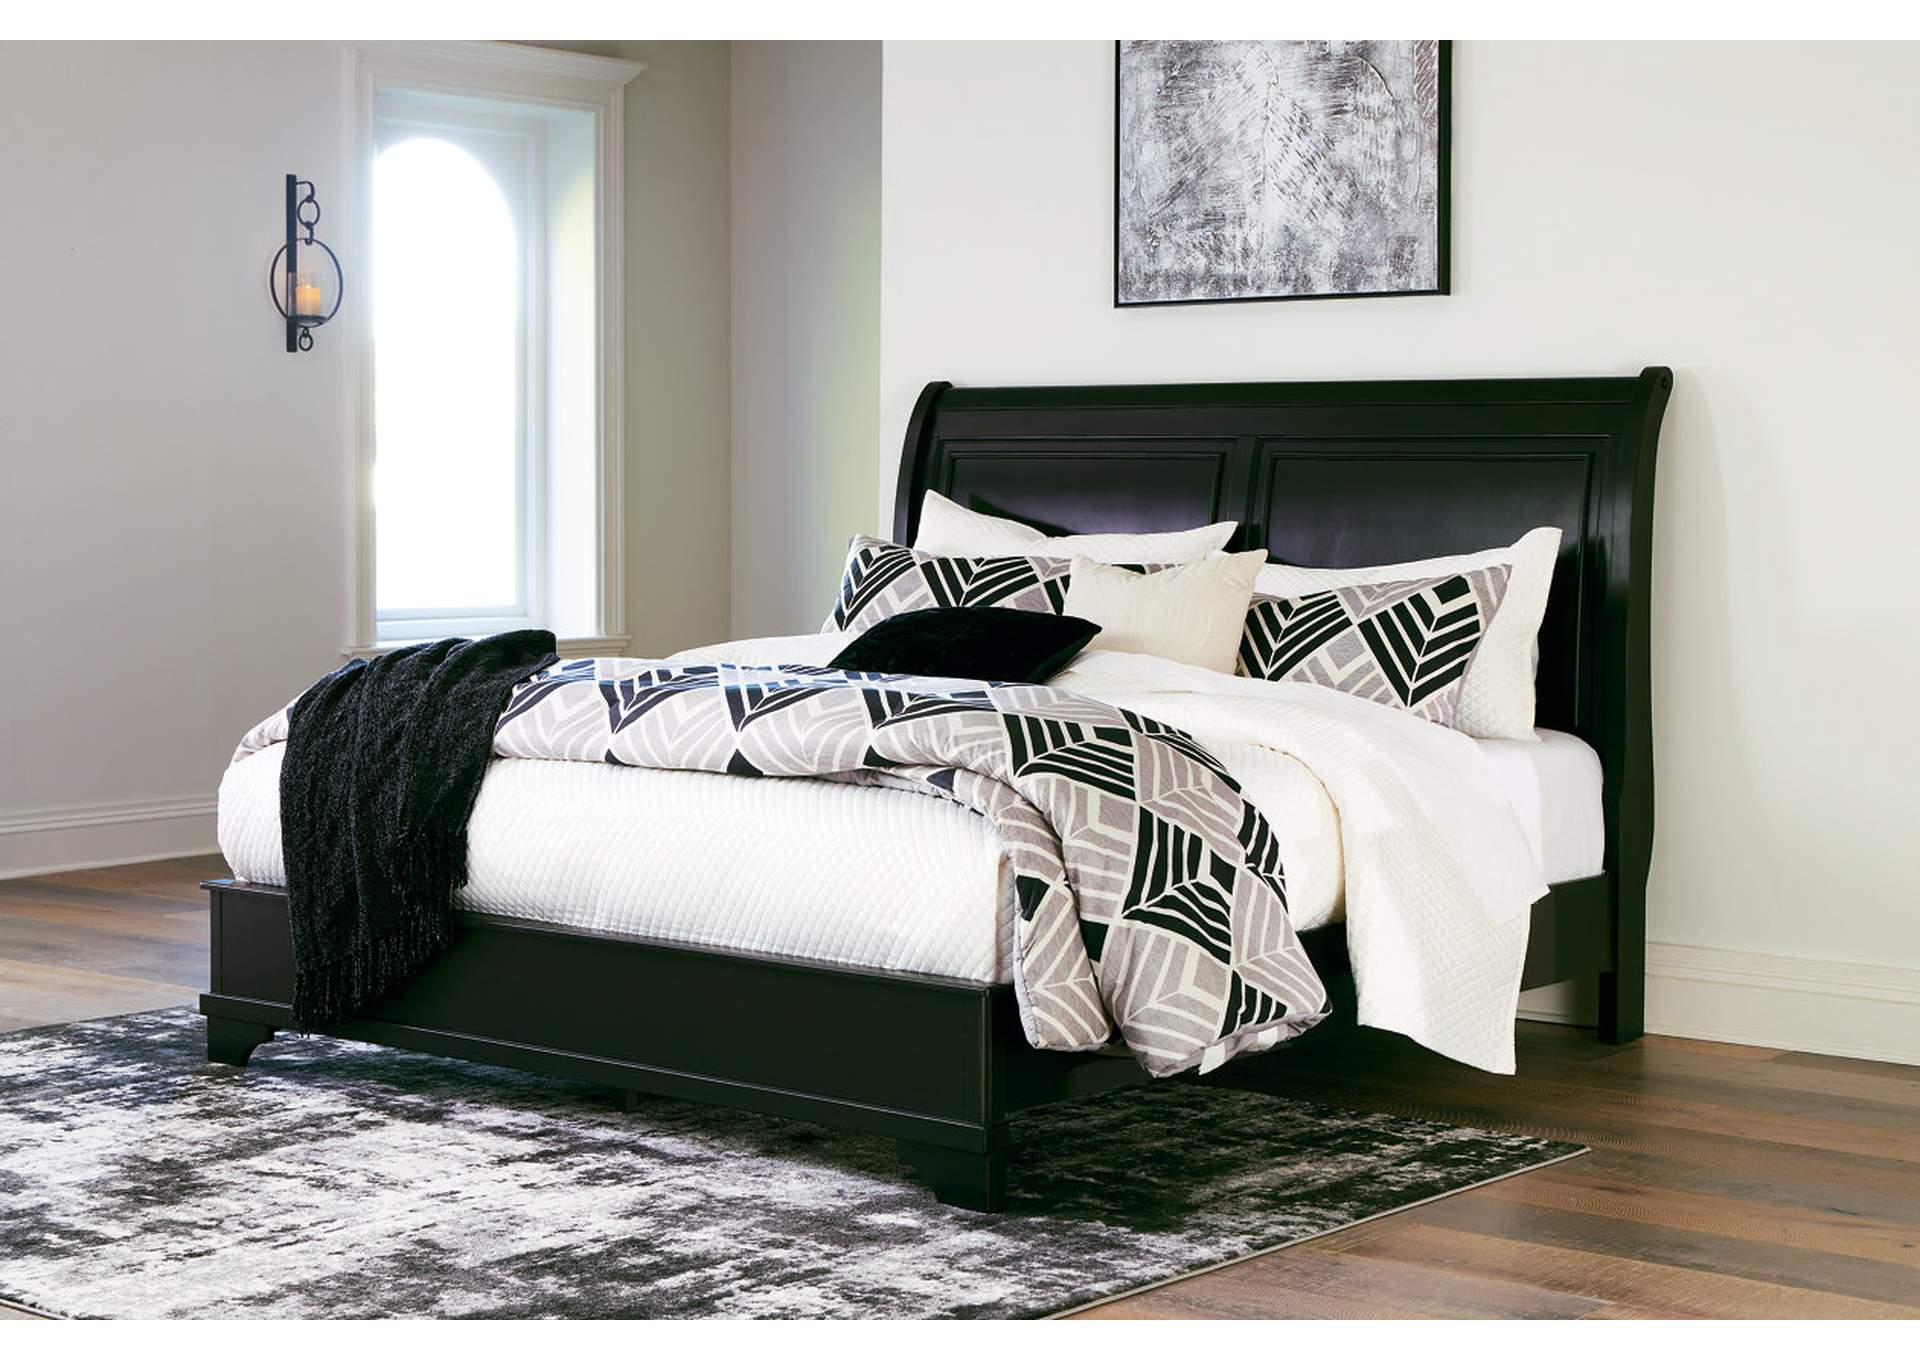 Chylanta King Sleigh Bed,Signature Design By Ashley